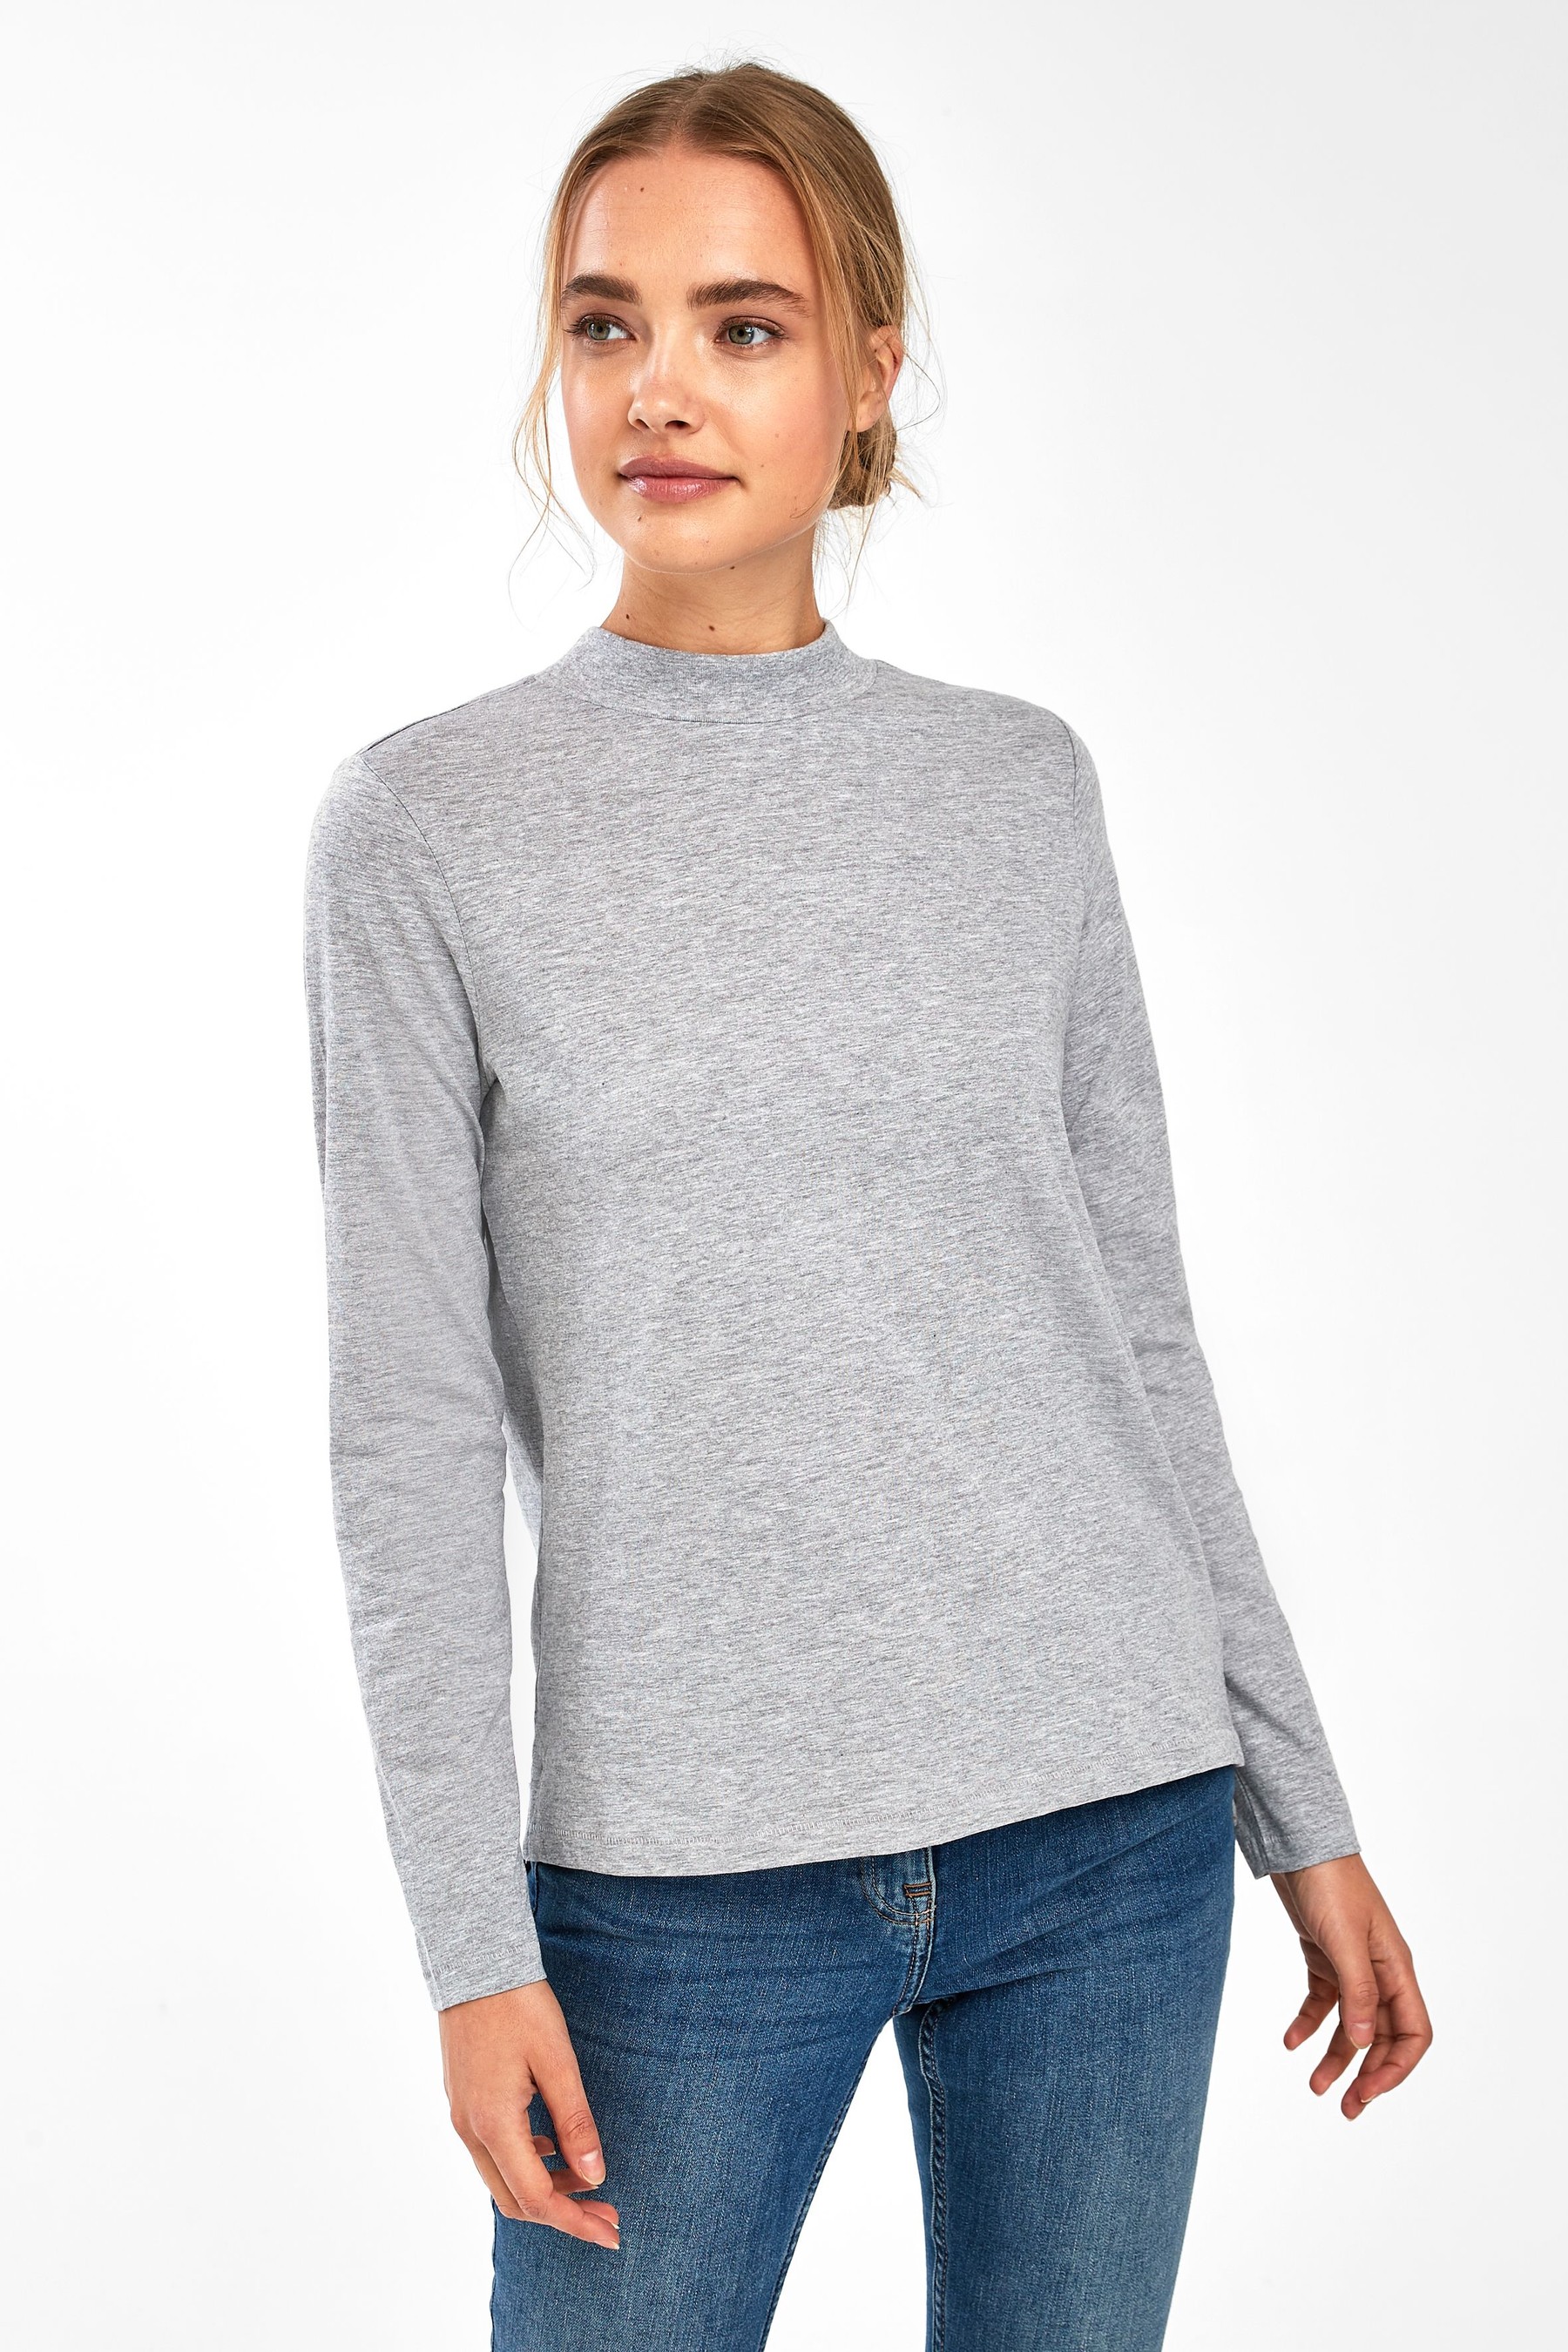 Buy Grey Marl High Neck Long Sleeve Top from the Next UK online shop